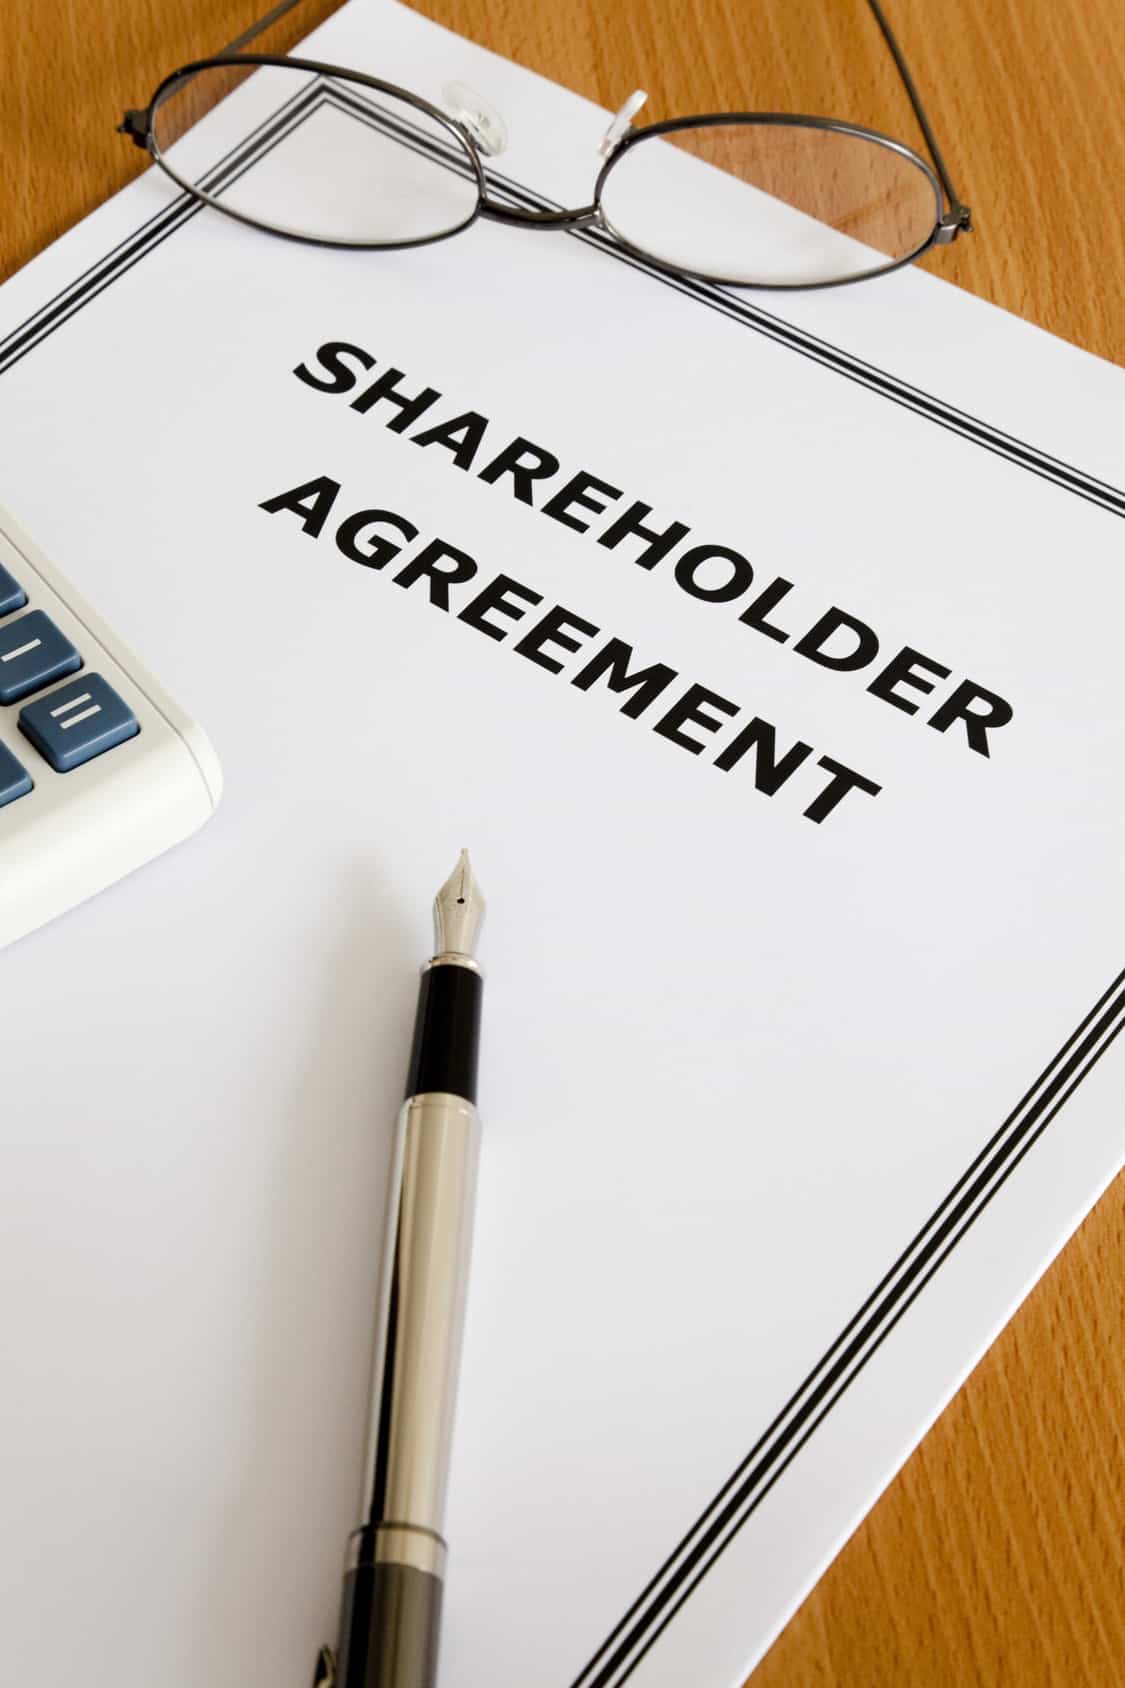 which document determines the number of shares in a company?